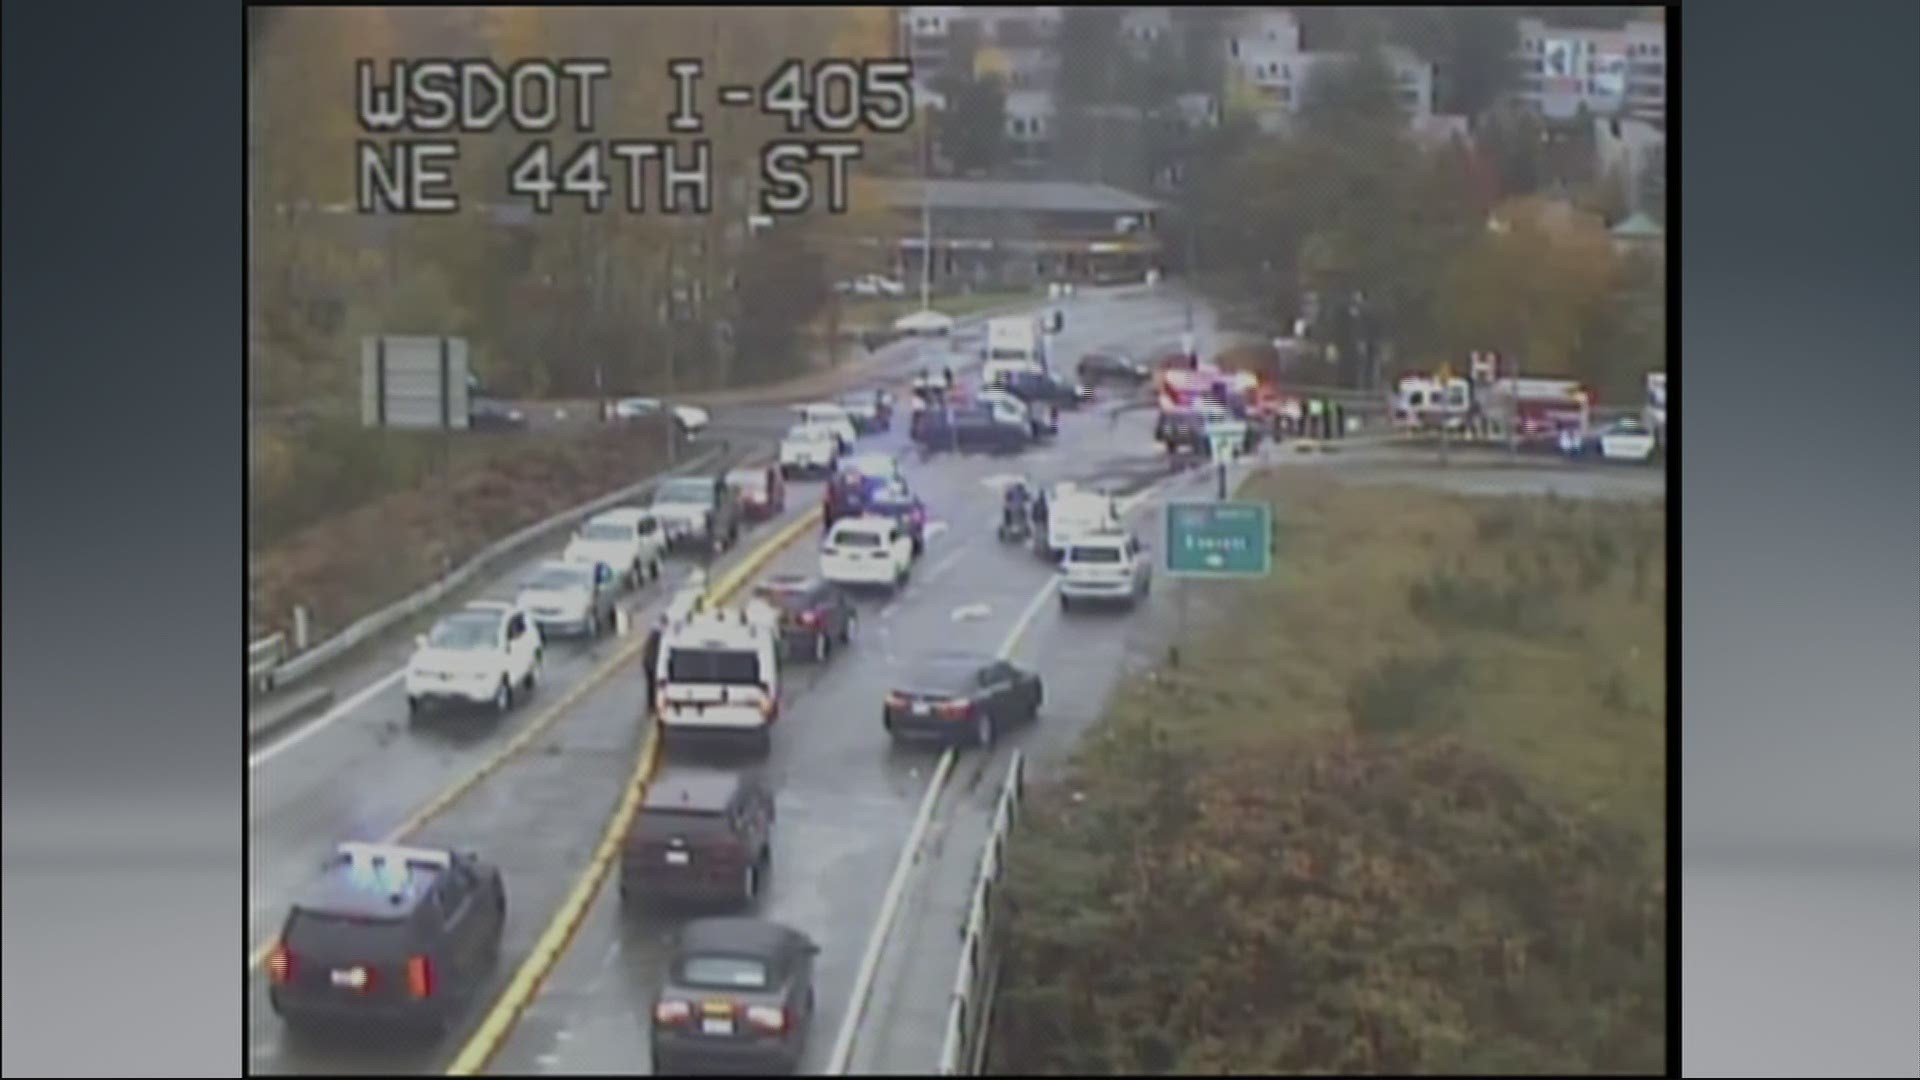 An officer fired at a naked suspect, who raised a gun at the officer, in Renton on Nov. 12, 2019. Ramps to I-405 at NE 44th Street closed while police investigate.